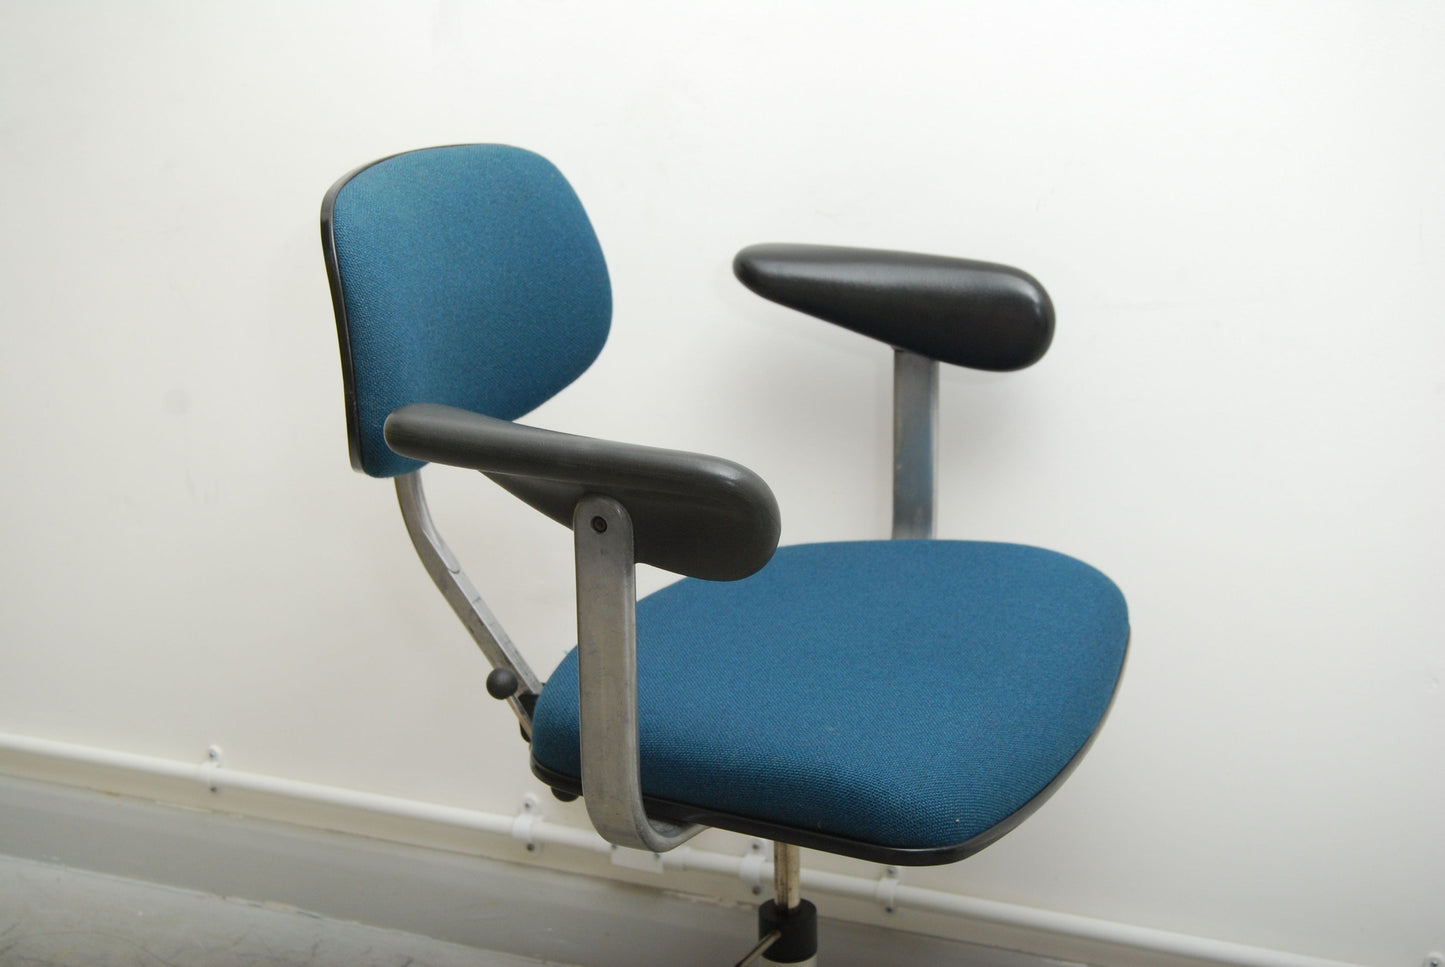 Desk chair by KEVI